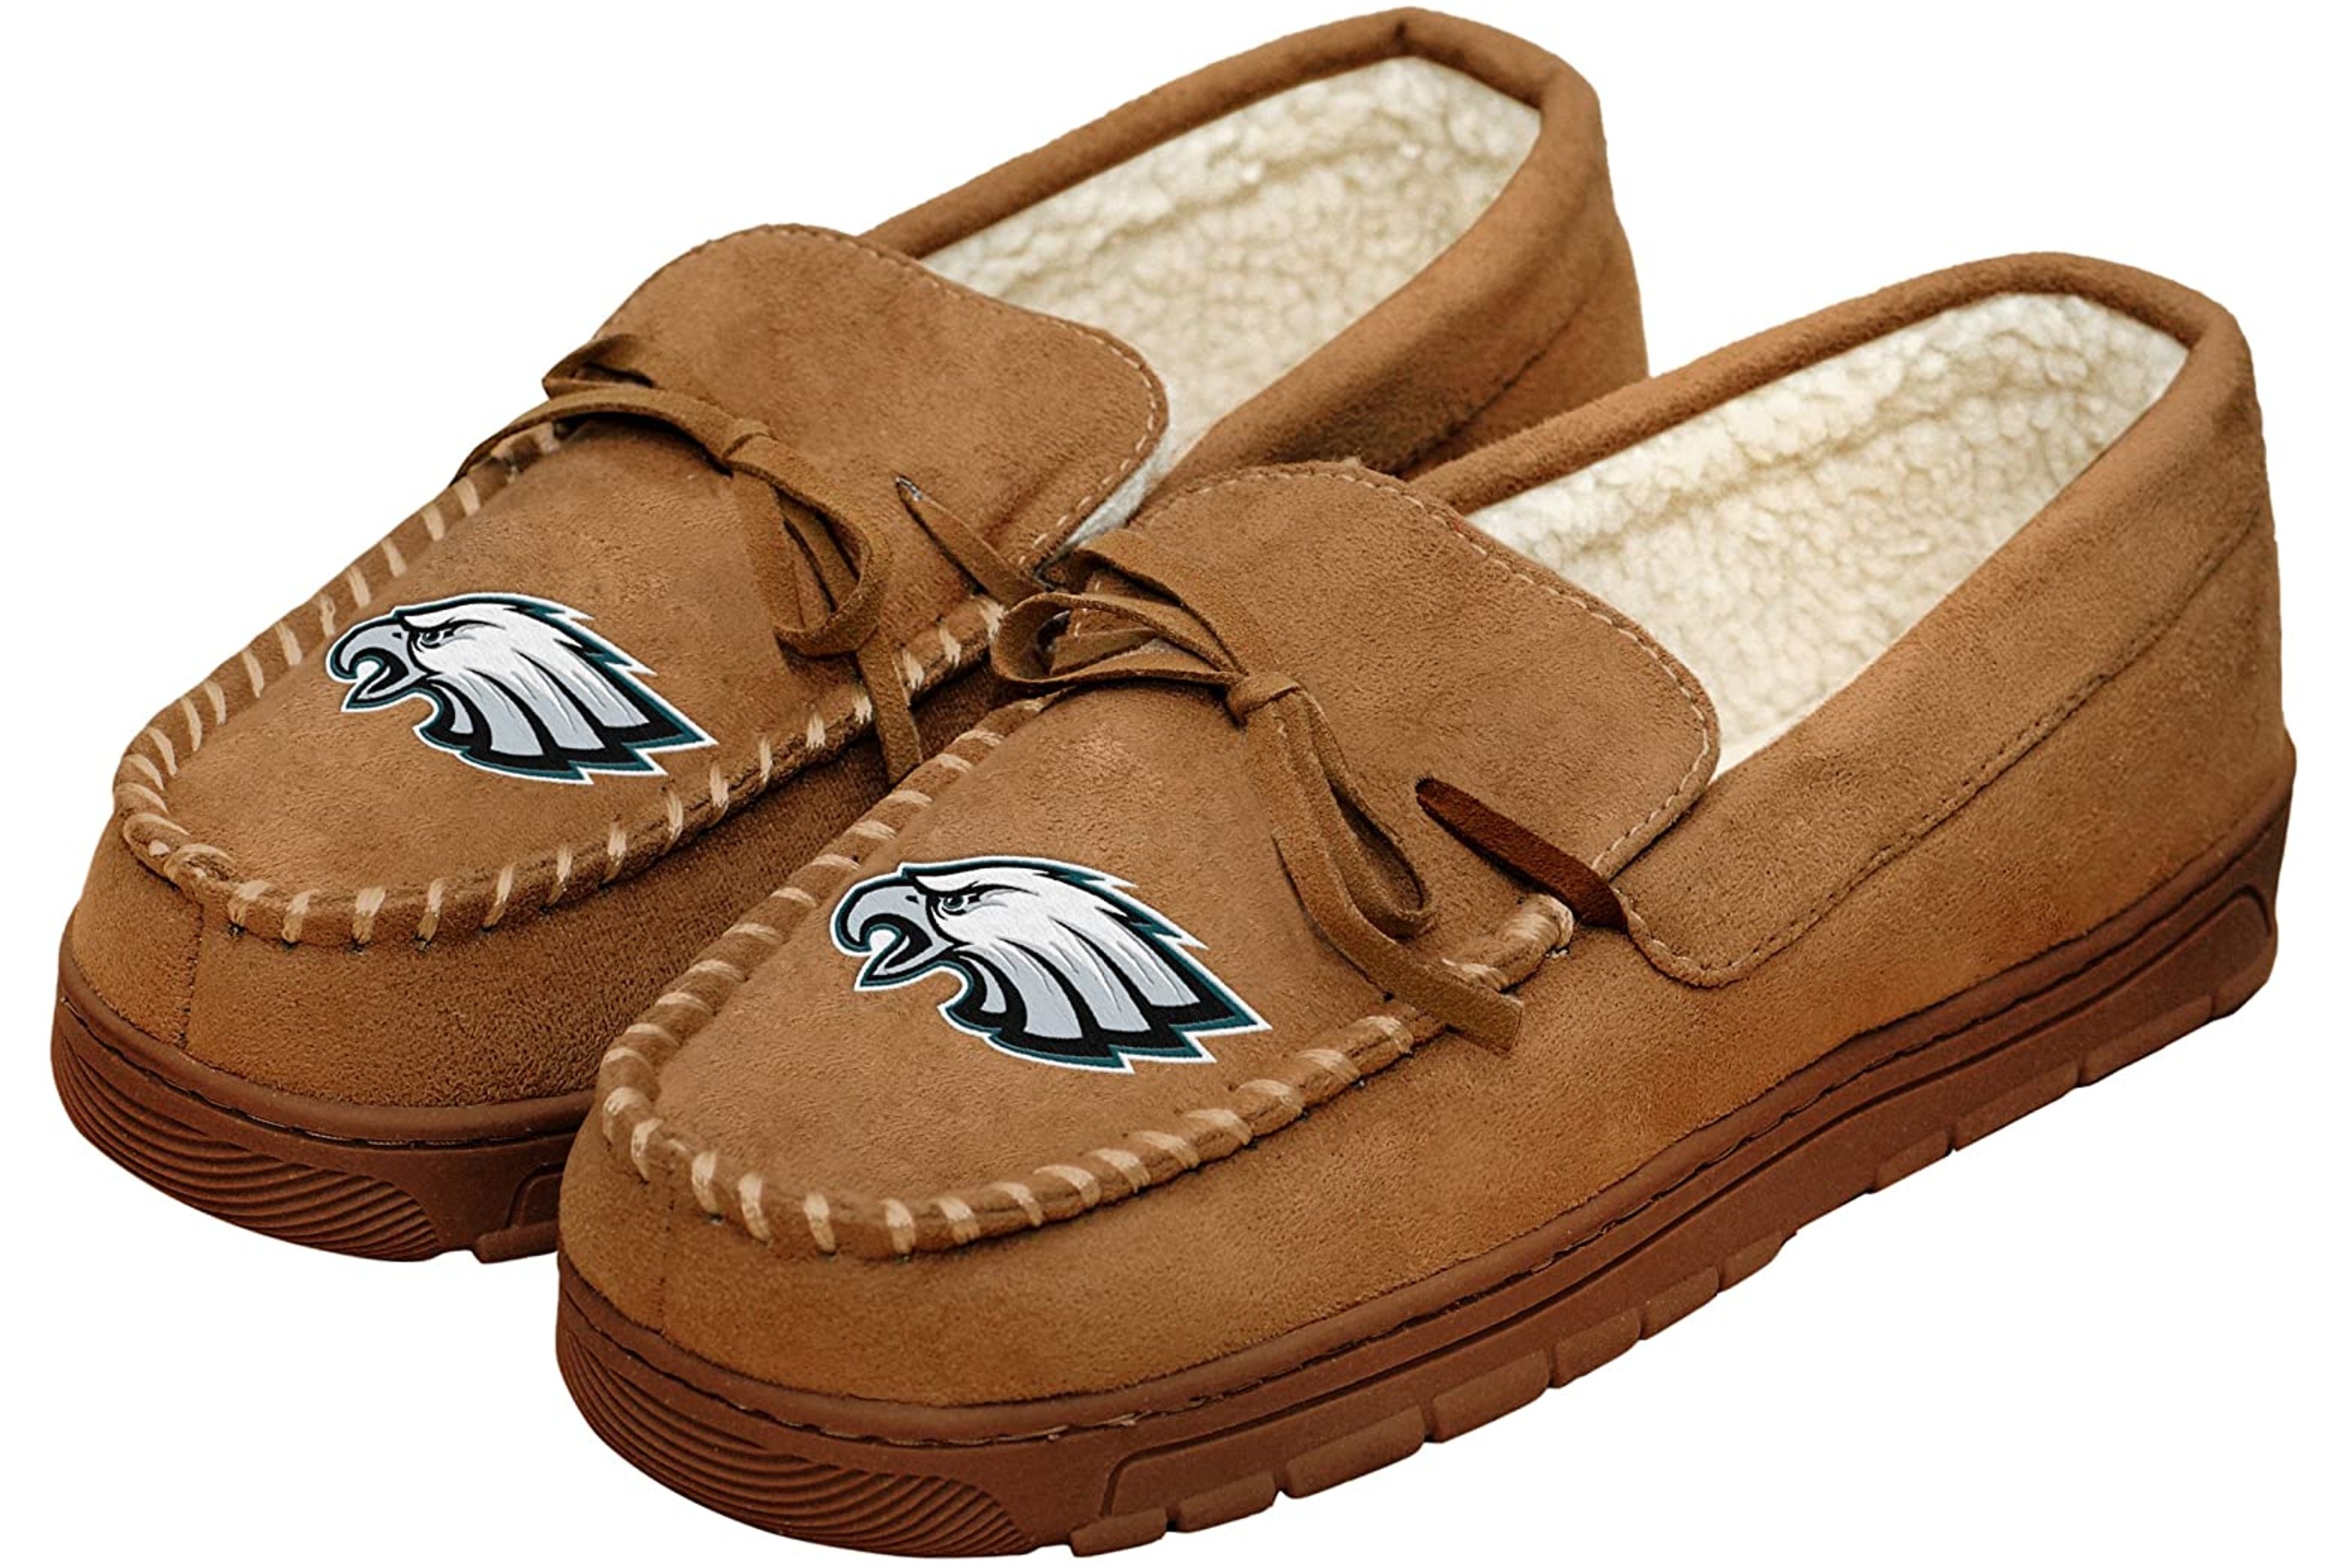 Foco Officially-Licensed Moccasin Slippers